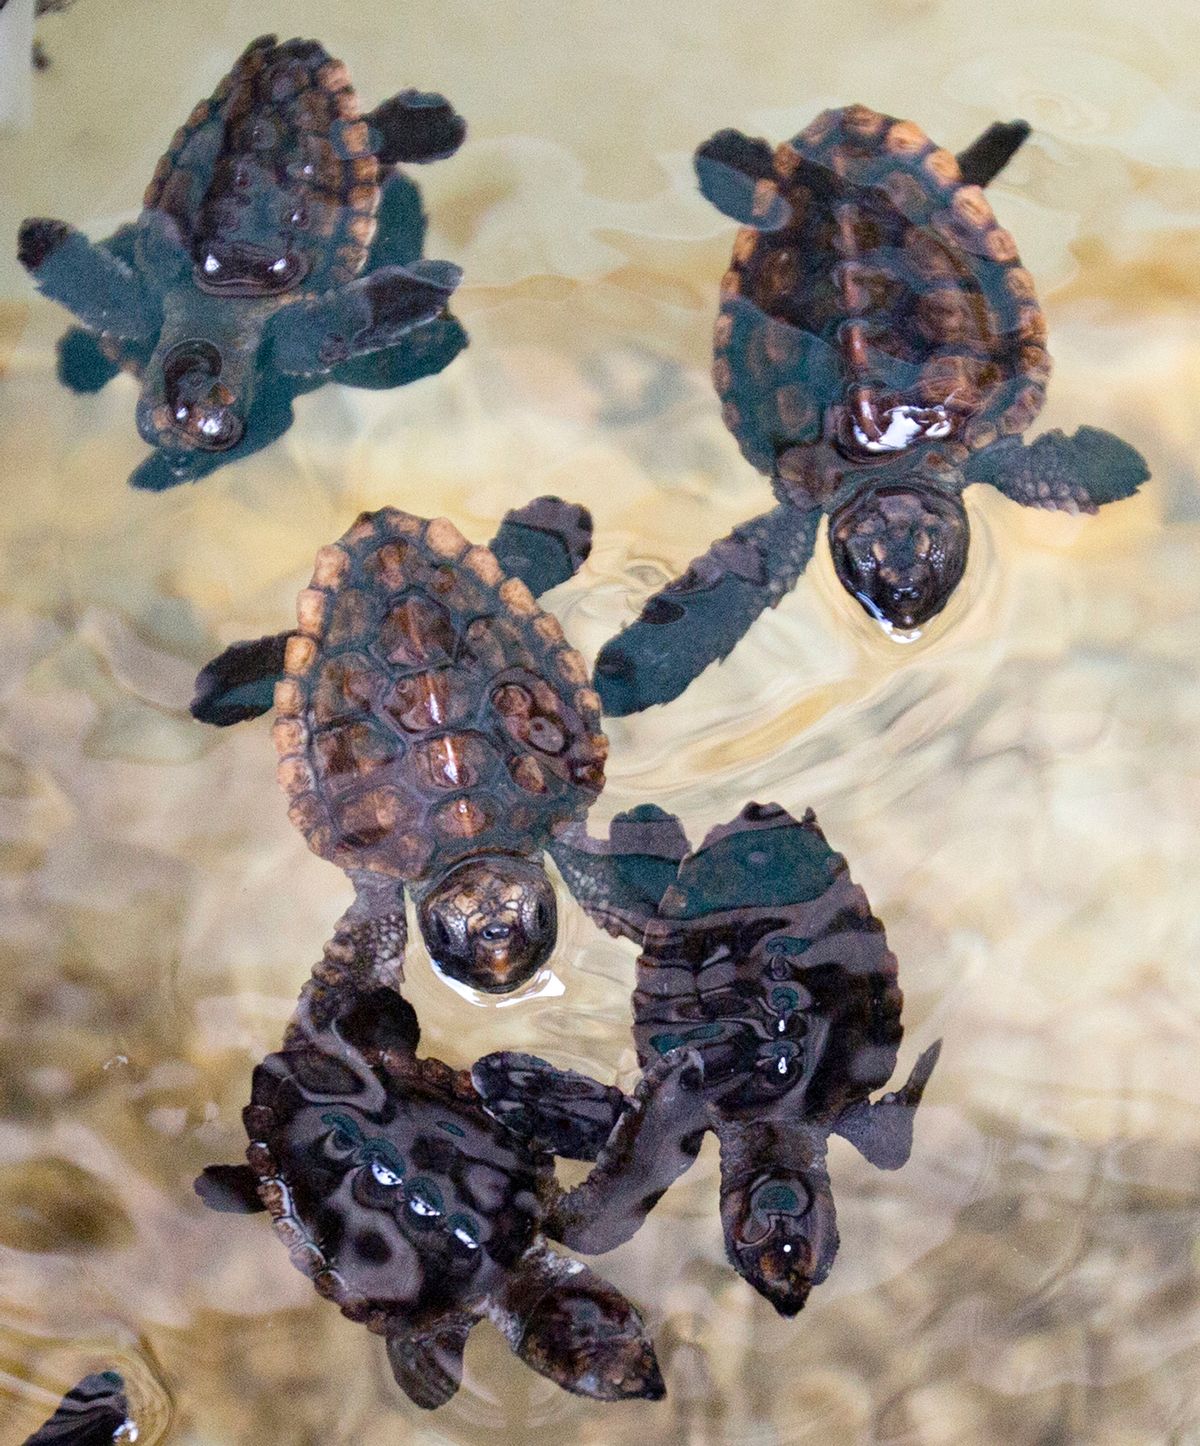 Loggerhead sea turtle hatchlings swim in a tank at the Gumbo Limbo Nature Center before being taken to a U.S. Coast Guard vessel for release, Monday, July 27, 2015, in Boca Raton, Fla. More than 600 Loggerhead hatchlings, nine Green sea turtle hatchlings, three rehabilitated Loggerhead post-hatchling and one Hawksbill post-hatchling sea turtle were released onto free-floating sargassum seaweed offshore. (AP Photo/Wilfredo Lee) (AP)